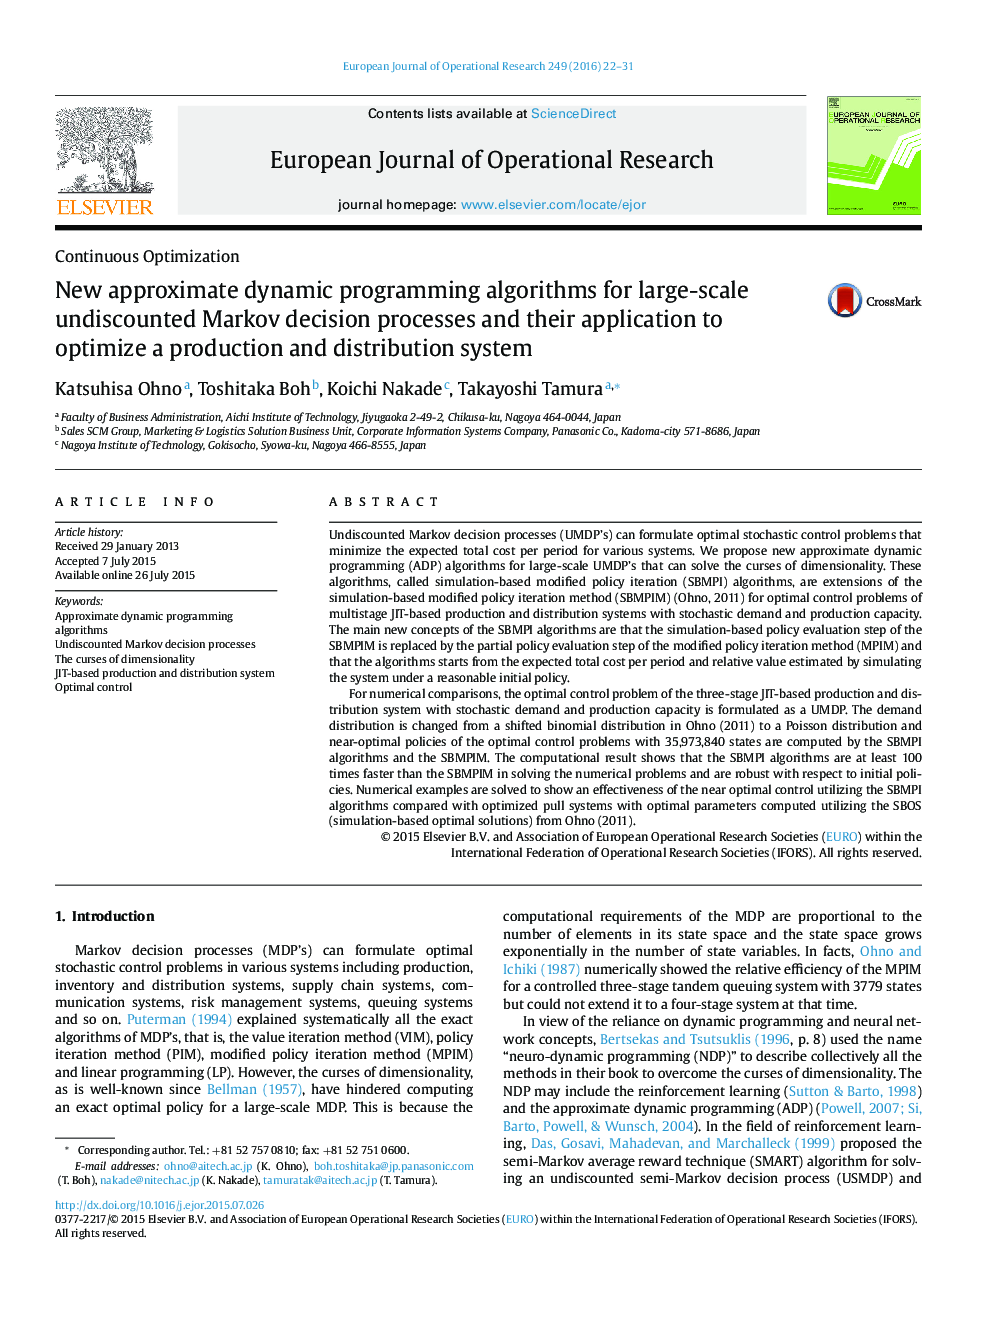 New approximate dynamic programming algorithms for large-scale undiscounted Markov decision processes and their application to optimize a production and distribution system